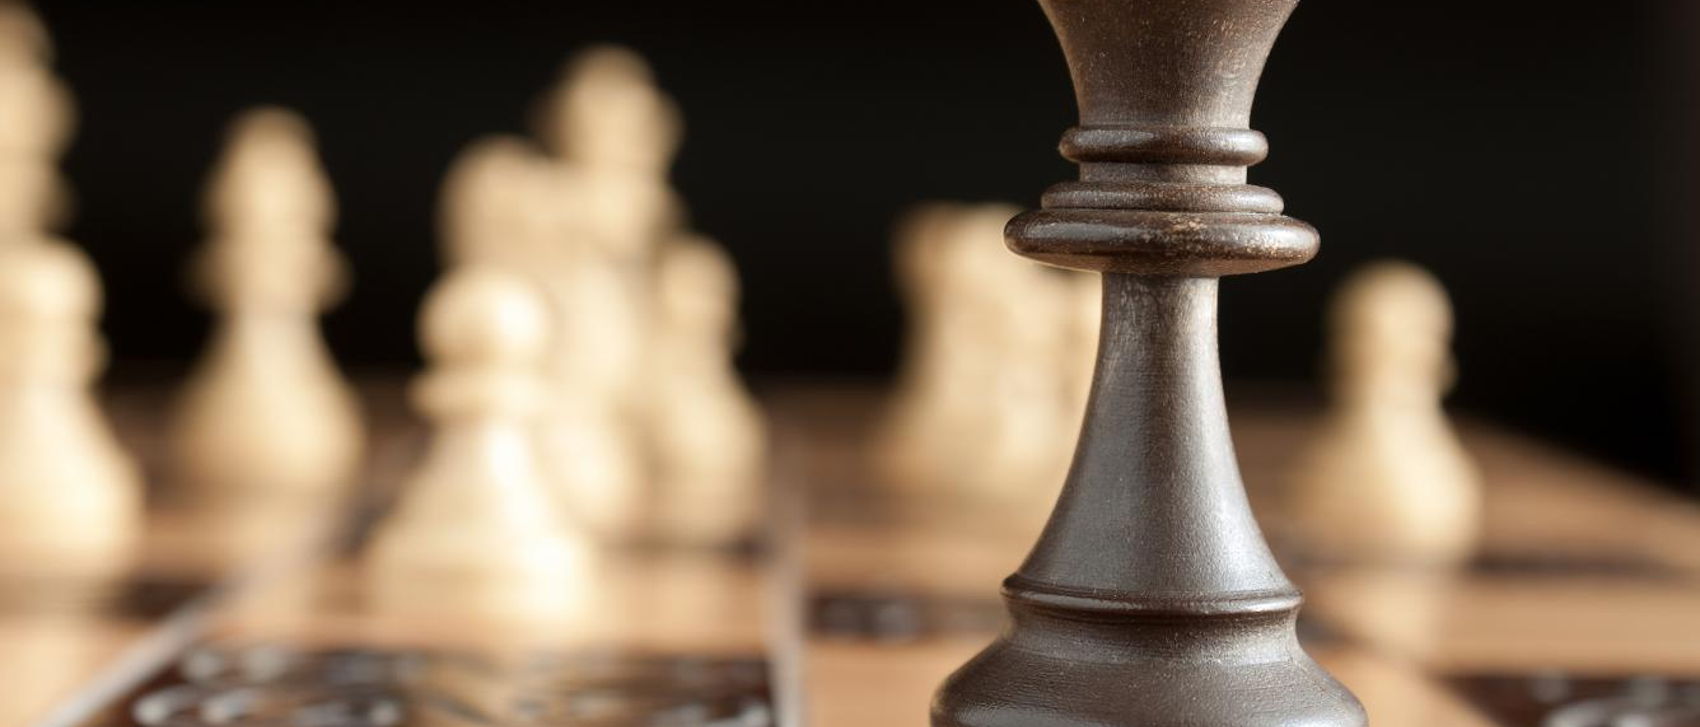 How to Achieve Your Goals by Playing Chess